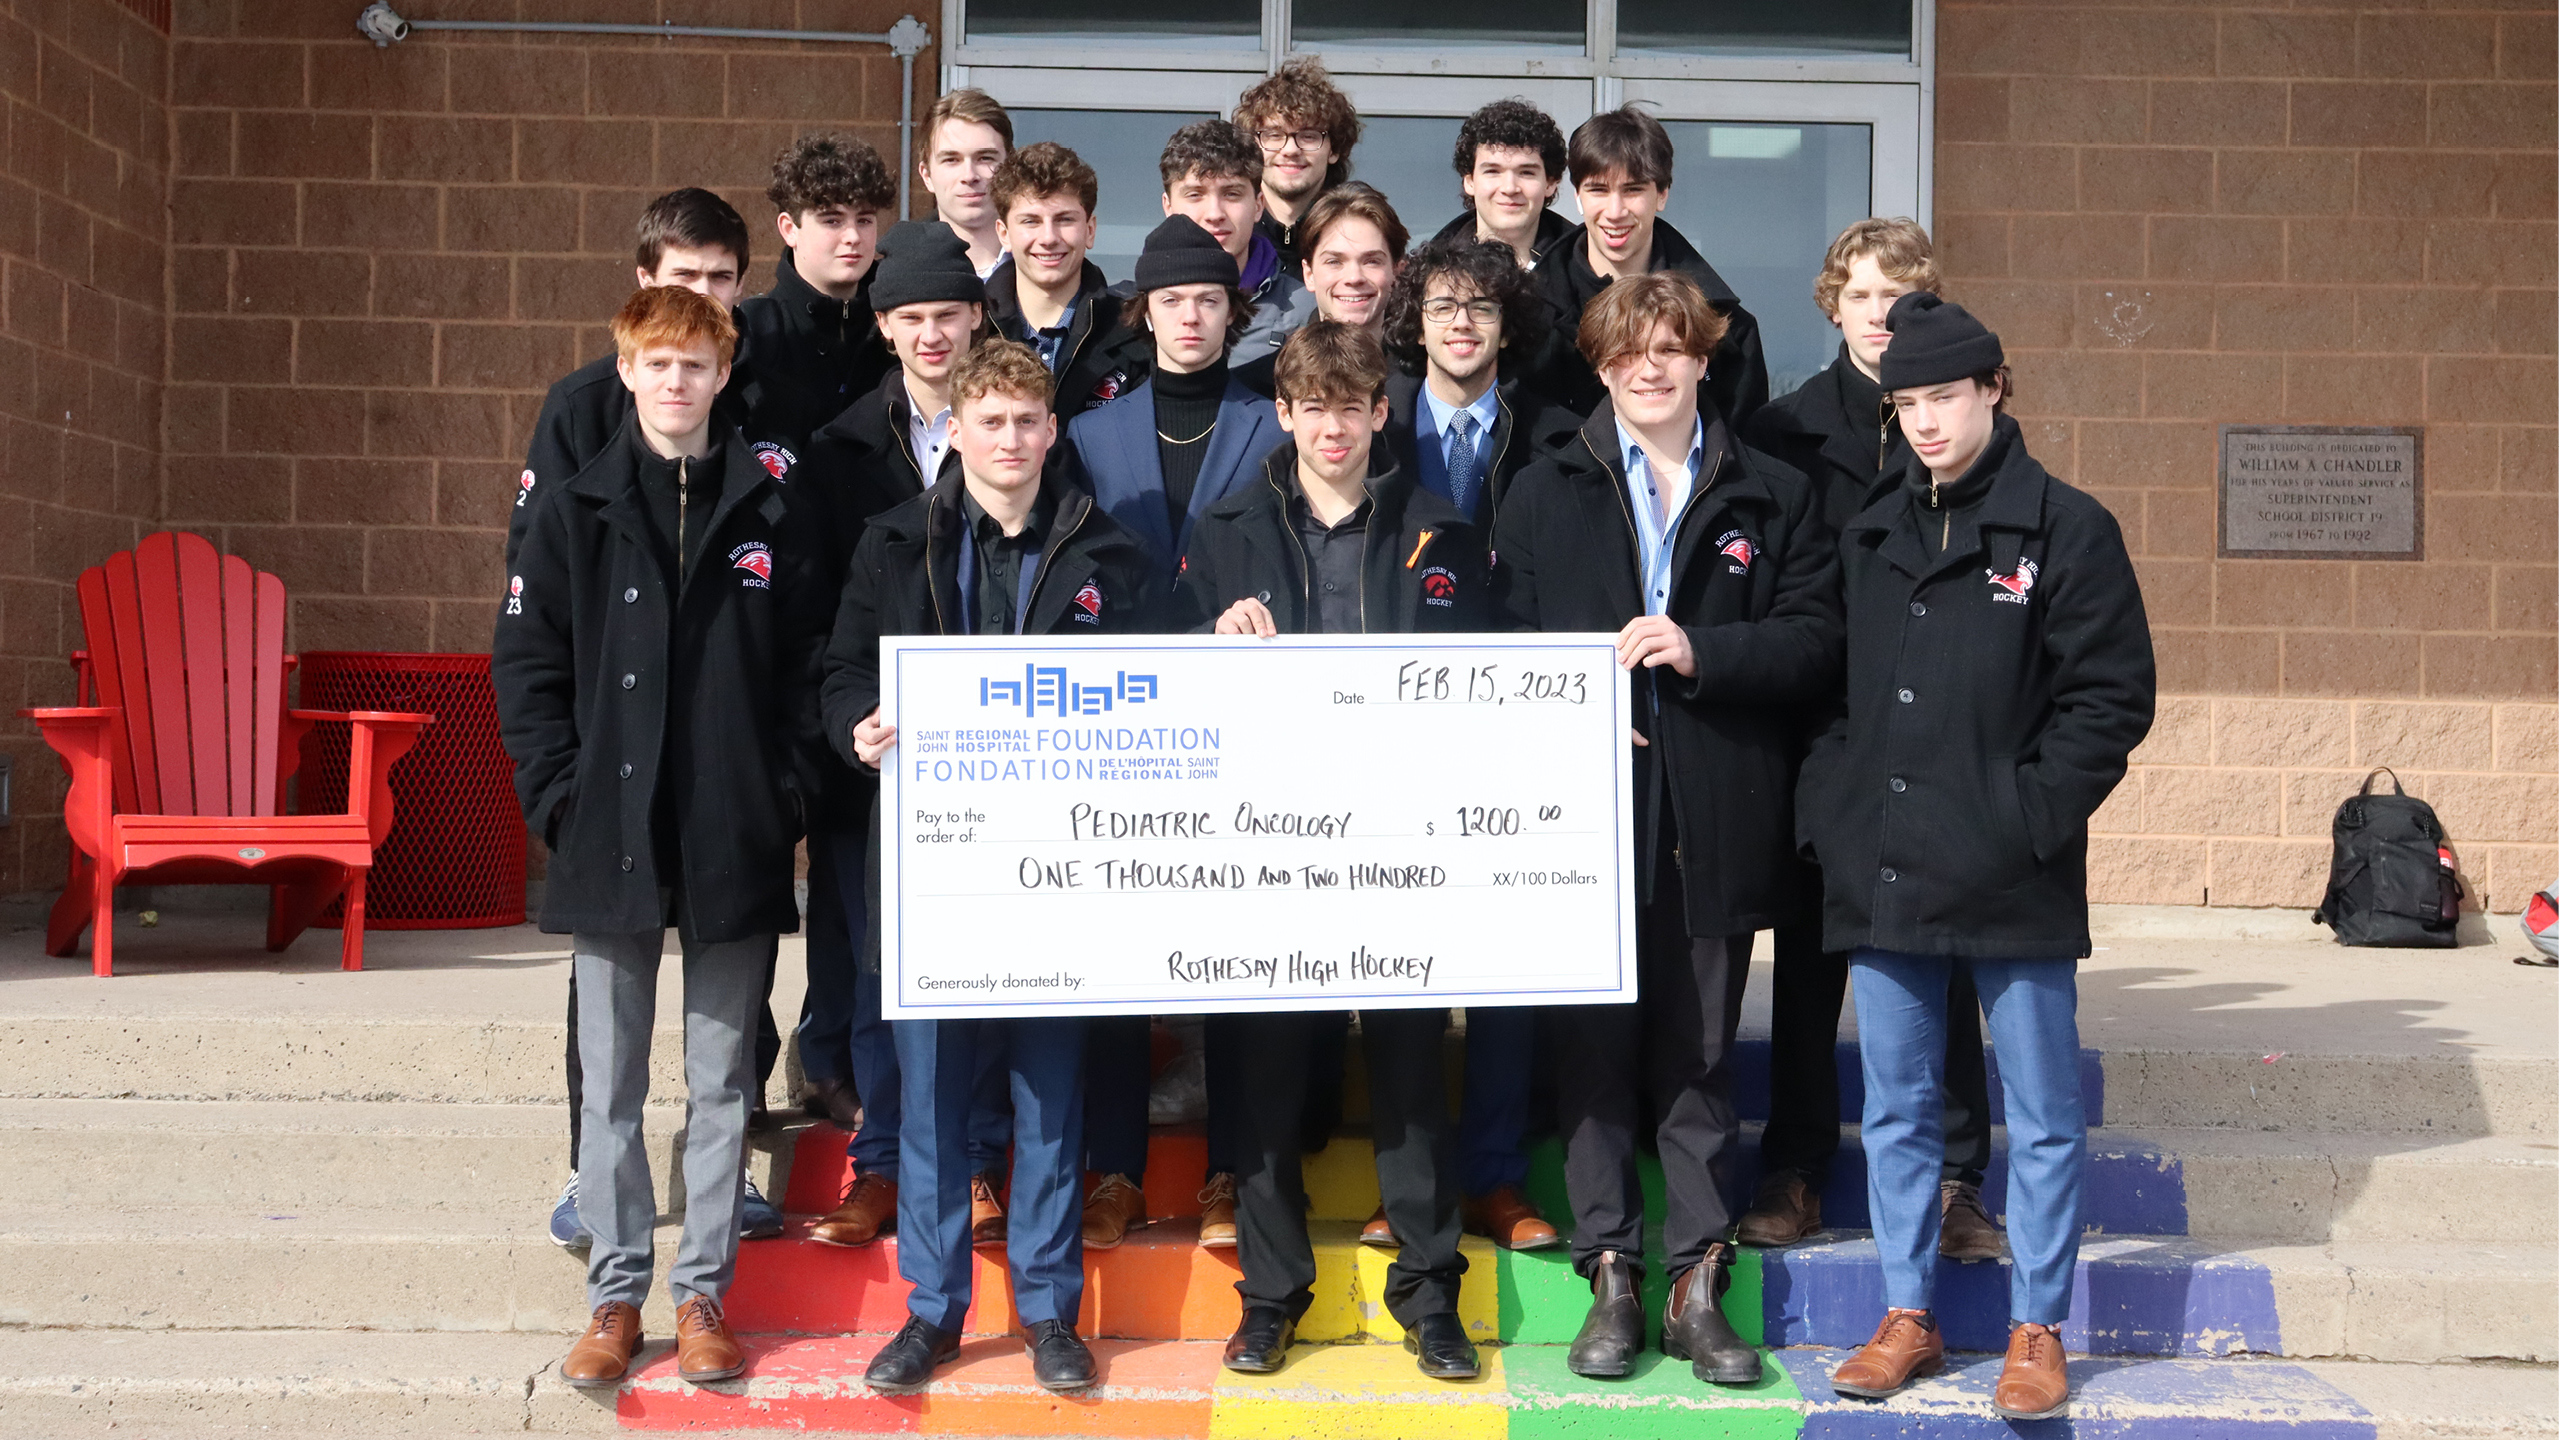 The Rothesay High School boys’ hockey teams have given more than $3,000 to support funding for patient care. Shown here are members of the 2022–23 team.
